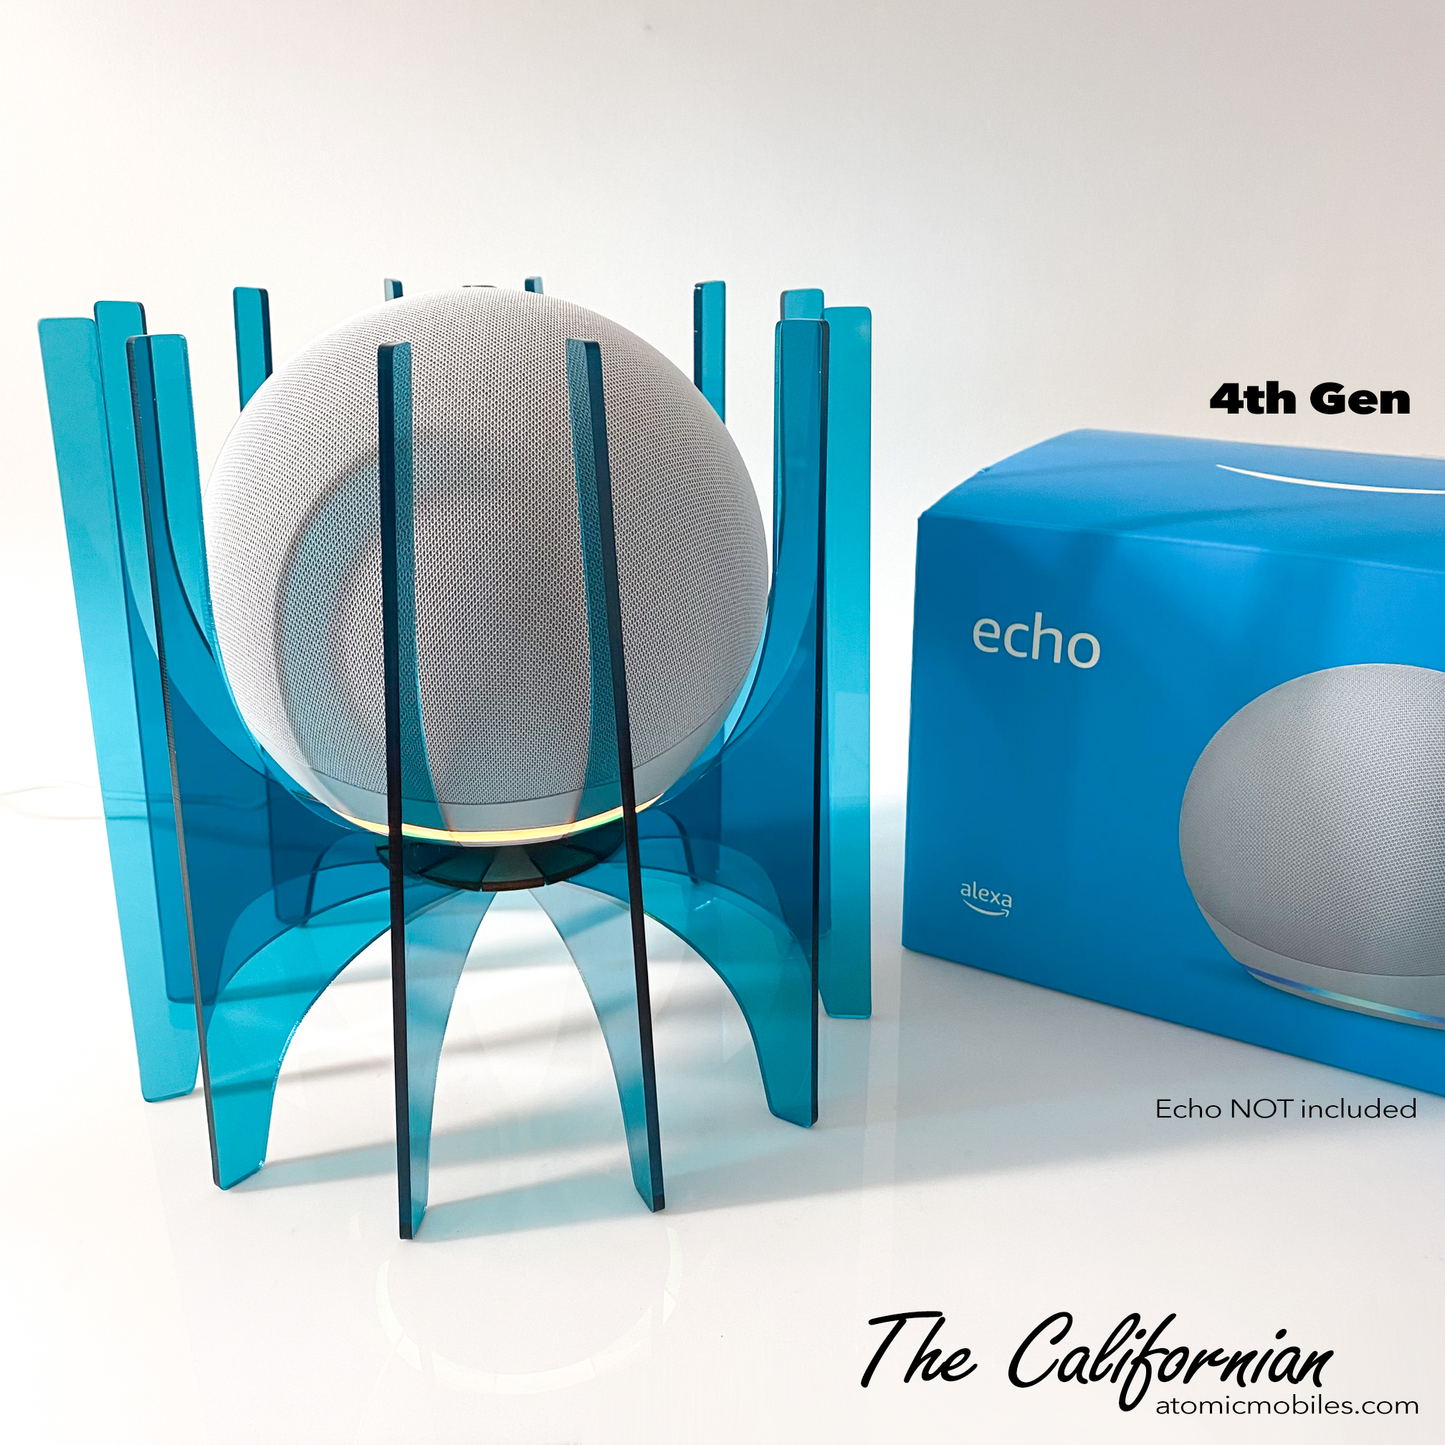 The California Space Age Holder for the Amazon Echo 4th Gen Alexa speaker (Echo not included) - mid century modern style holder by AtomicMobiles.com